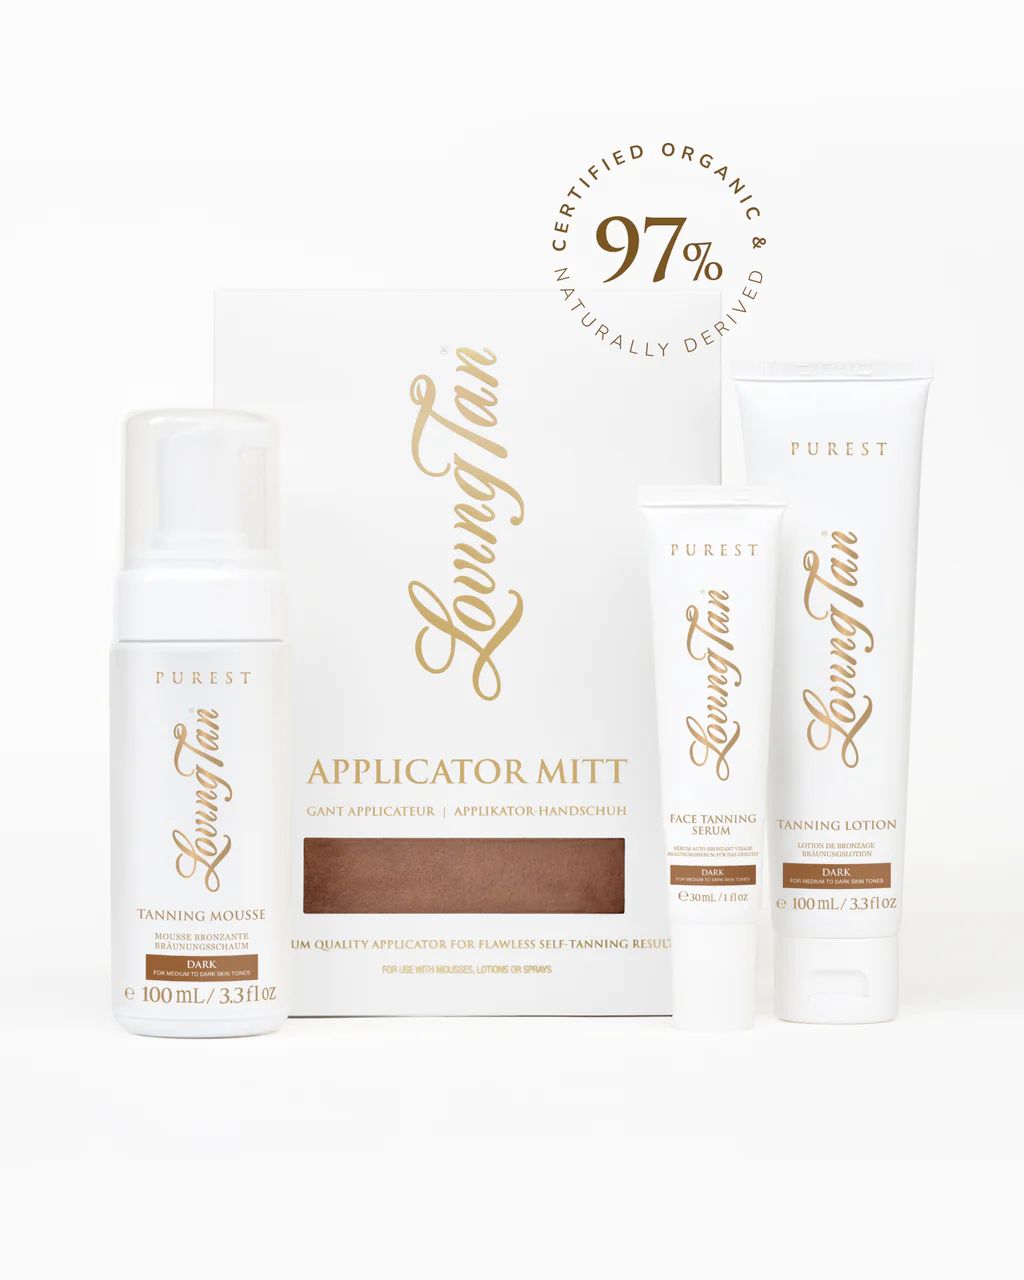 The Purest Collection Dark | Loving Tan - US